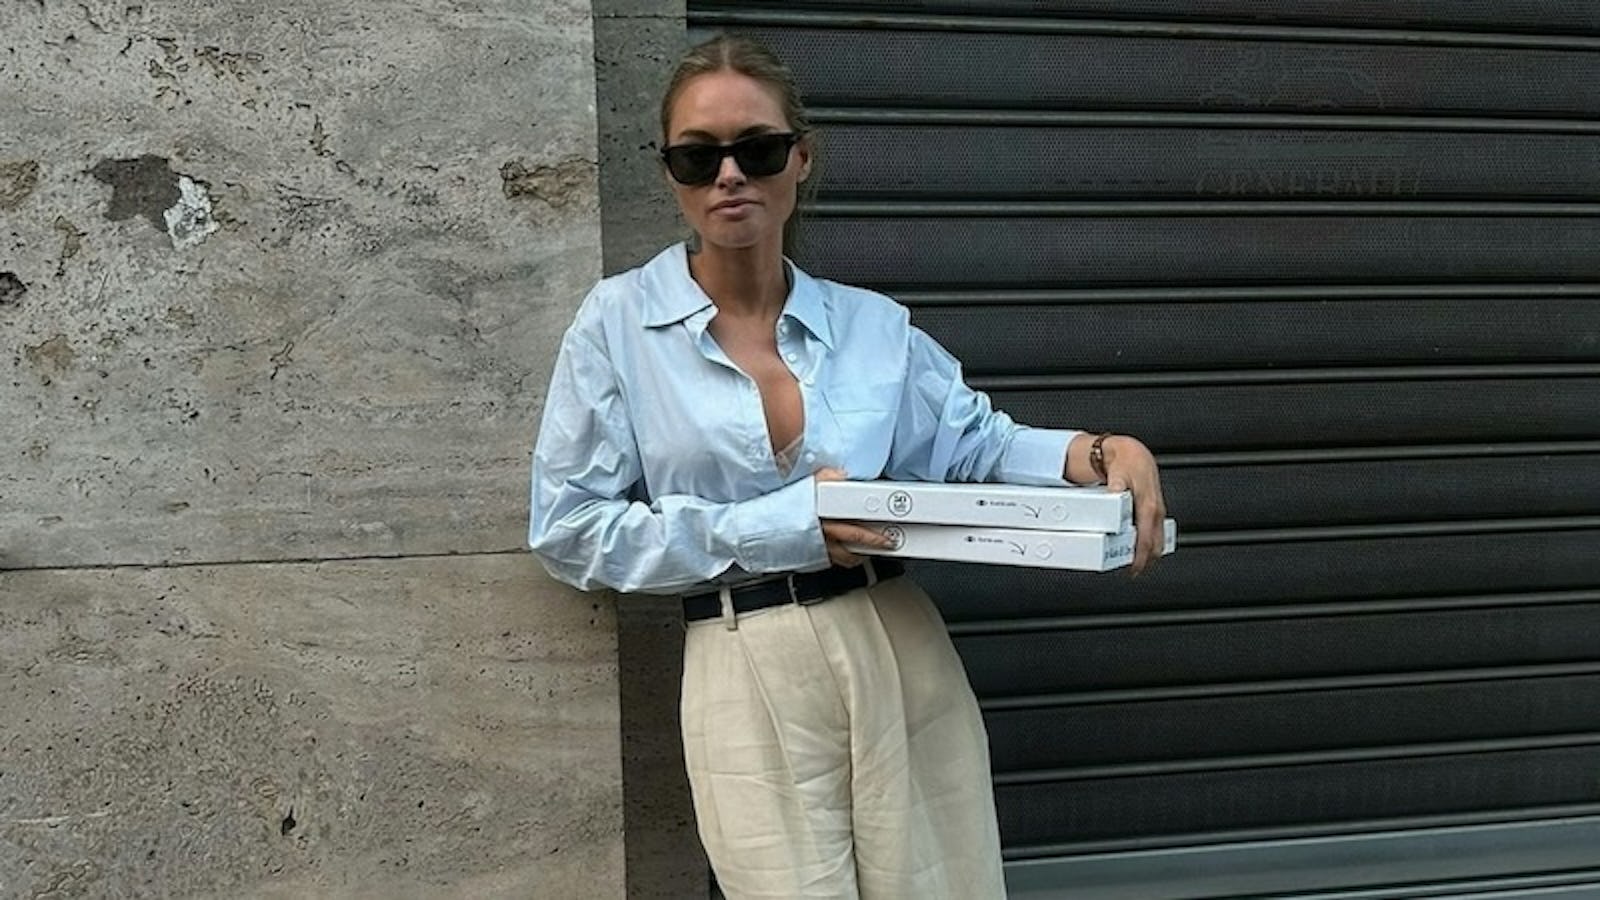 @clairerose wears blue button down and linen shorts holding pizza boxes